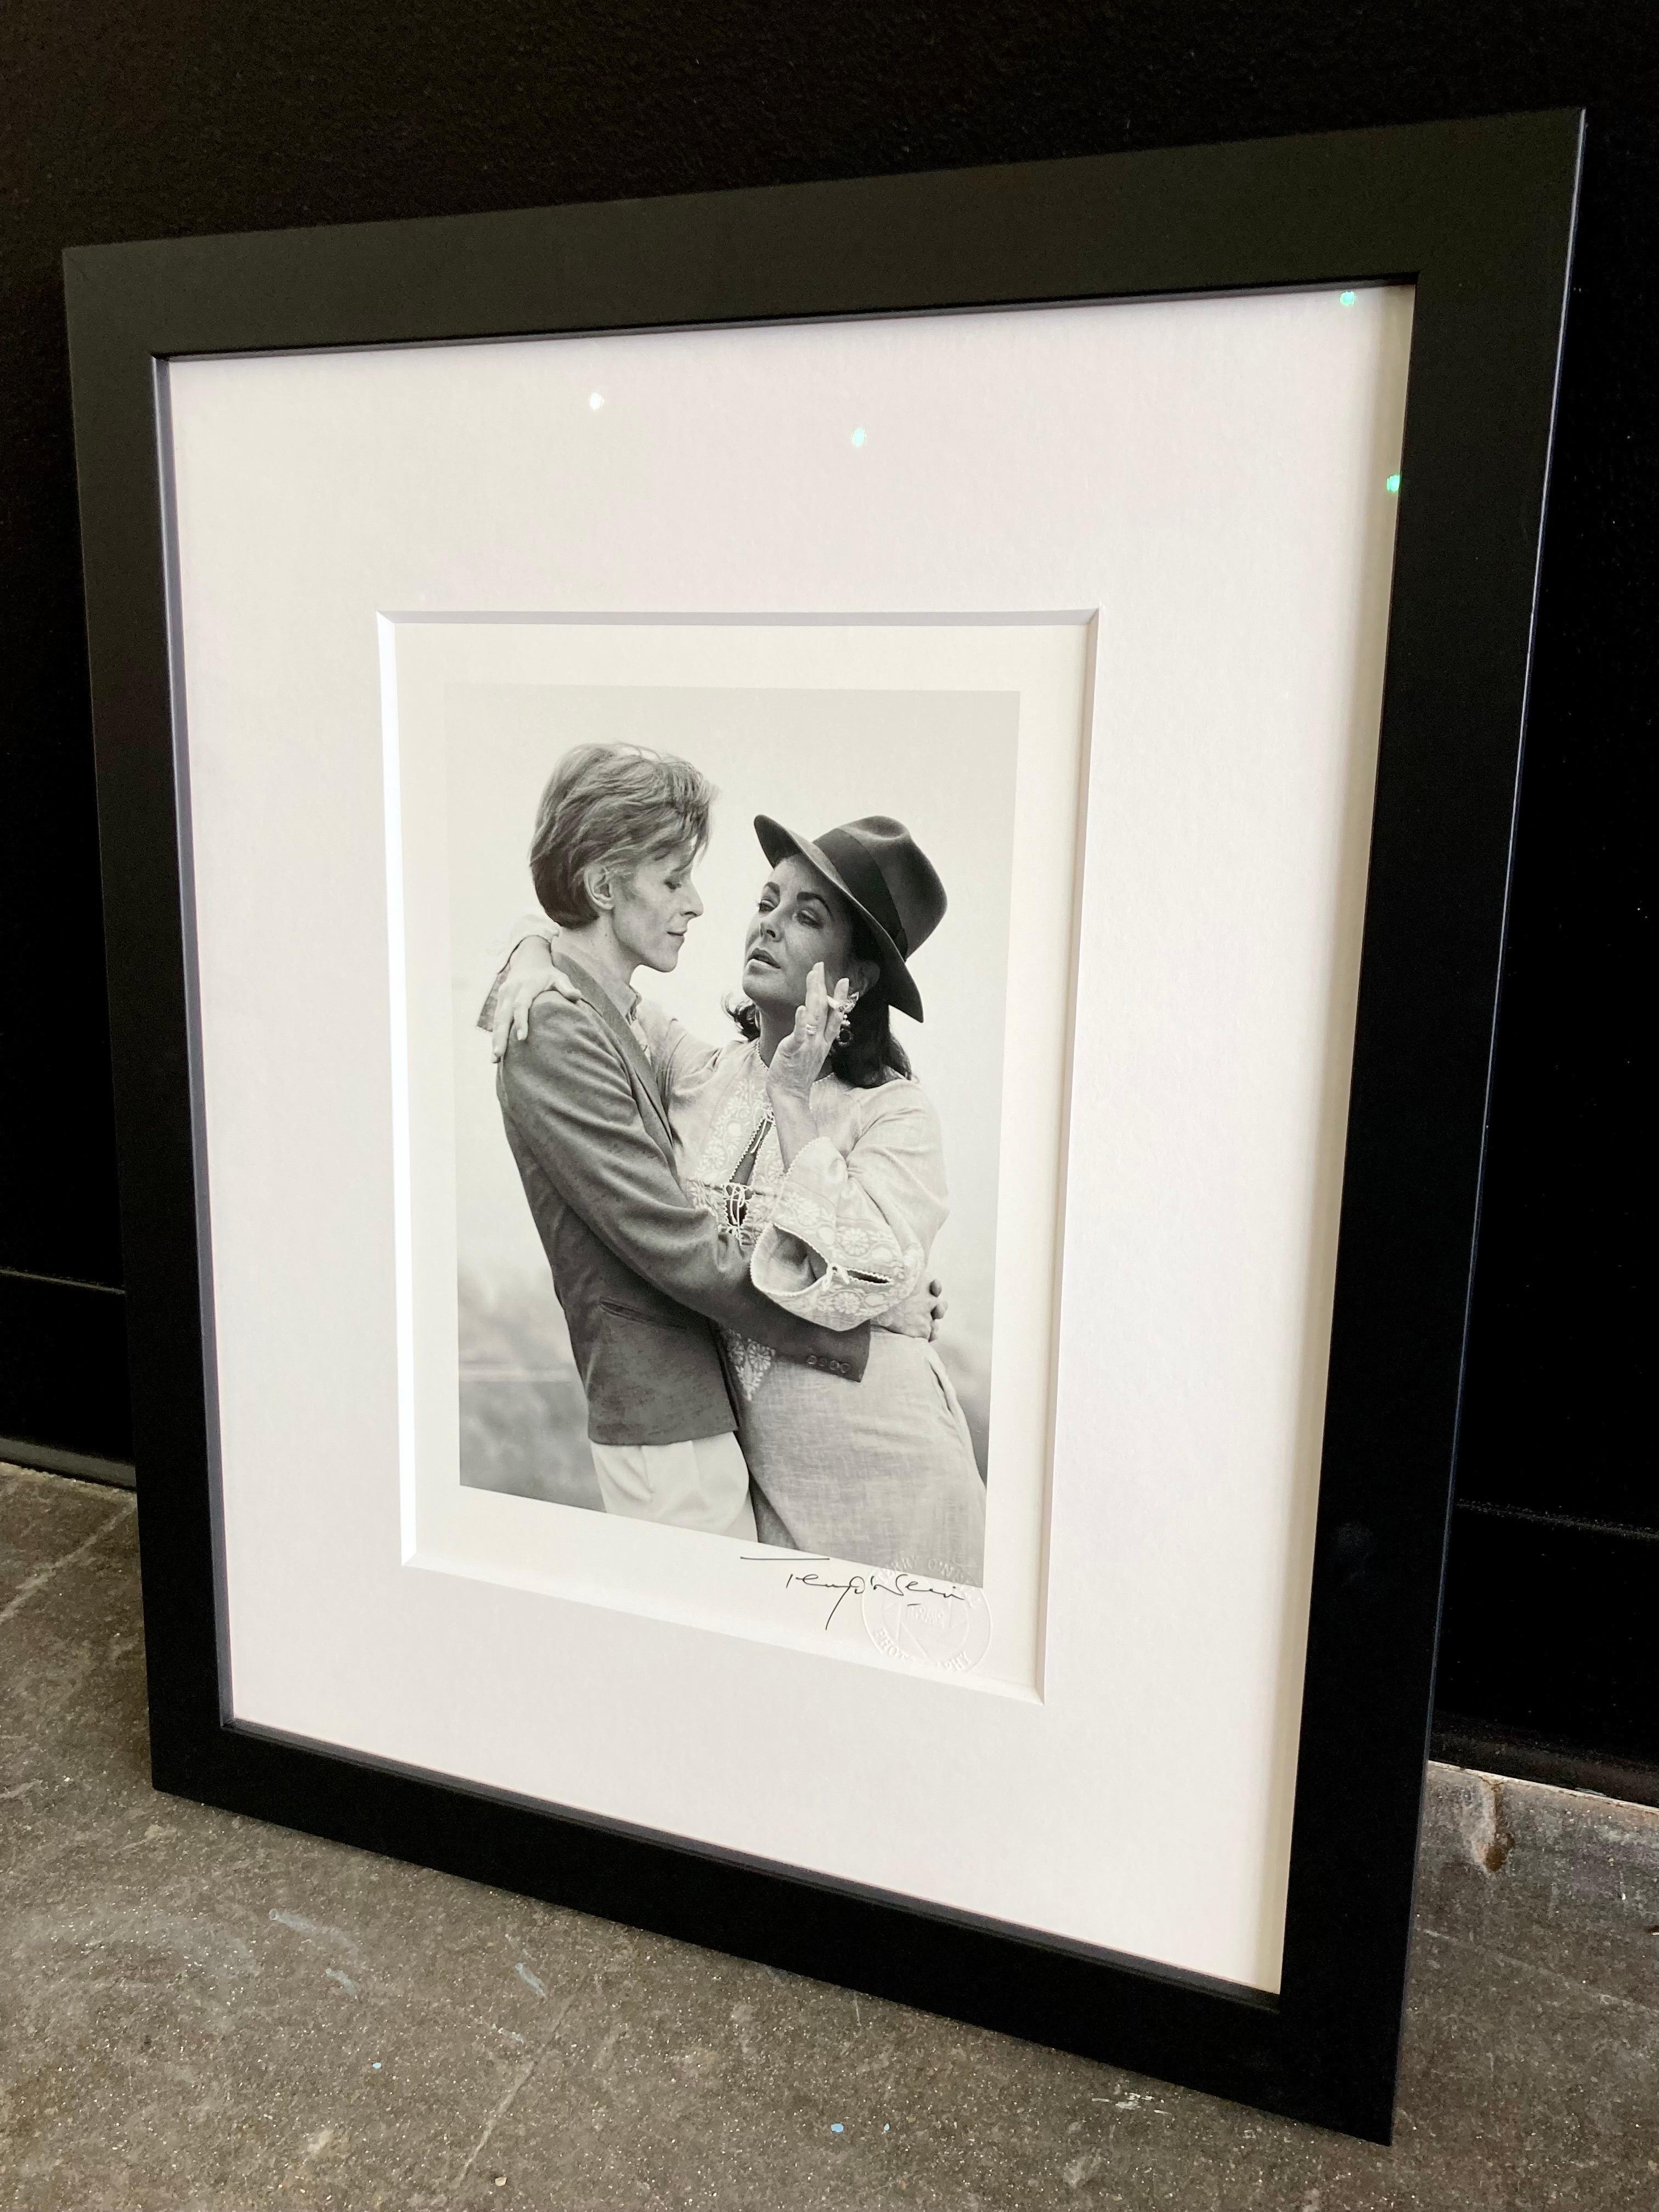 David Bowie and Elizabeth Taylor at director George Cukor’s home in Los Angeles, 1975, signed Terry O'Neill, 8x10" print, custom framed with non-glare museum glass, 8ply matting and a simple black frame.

This print was recently framed, so the frame